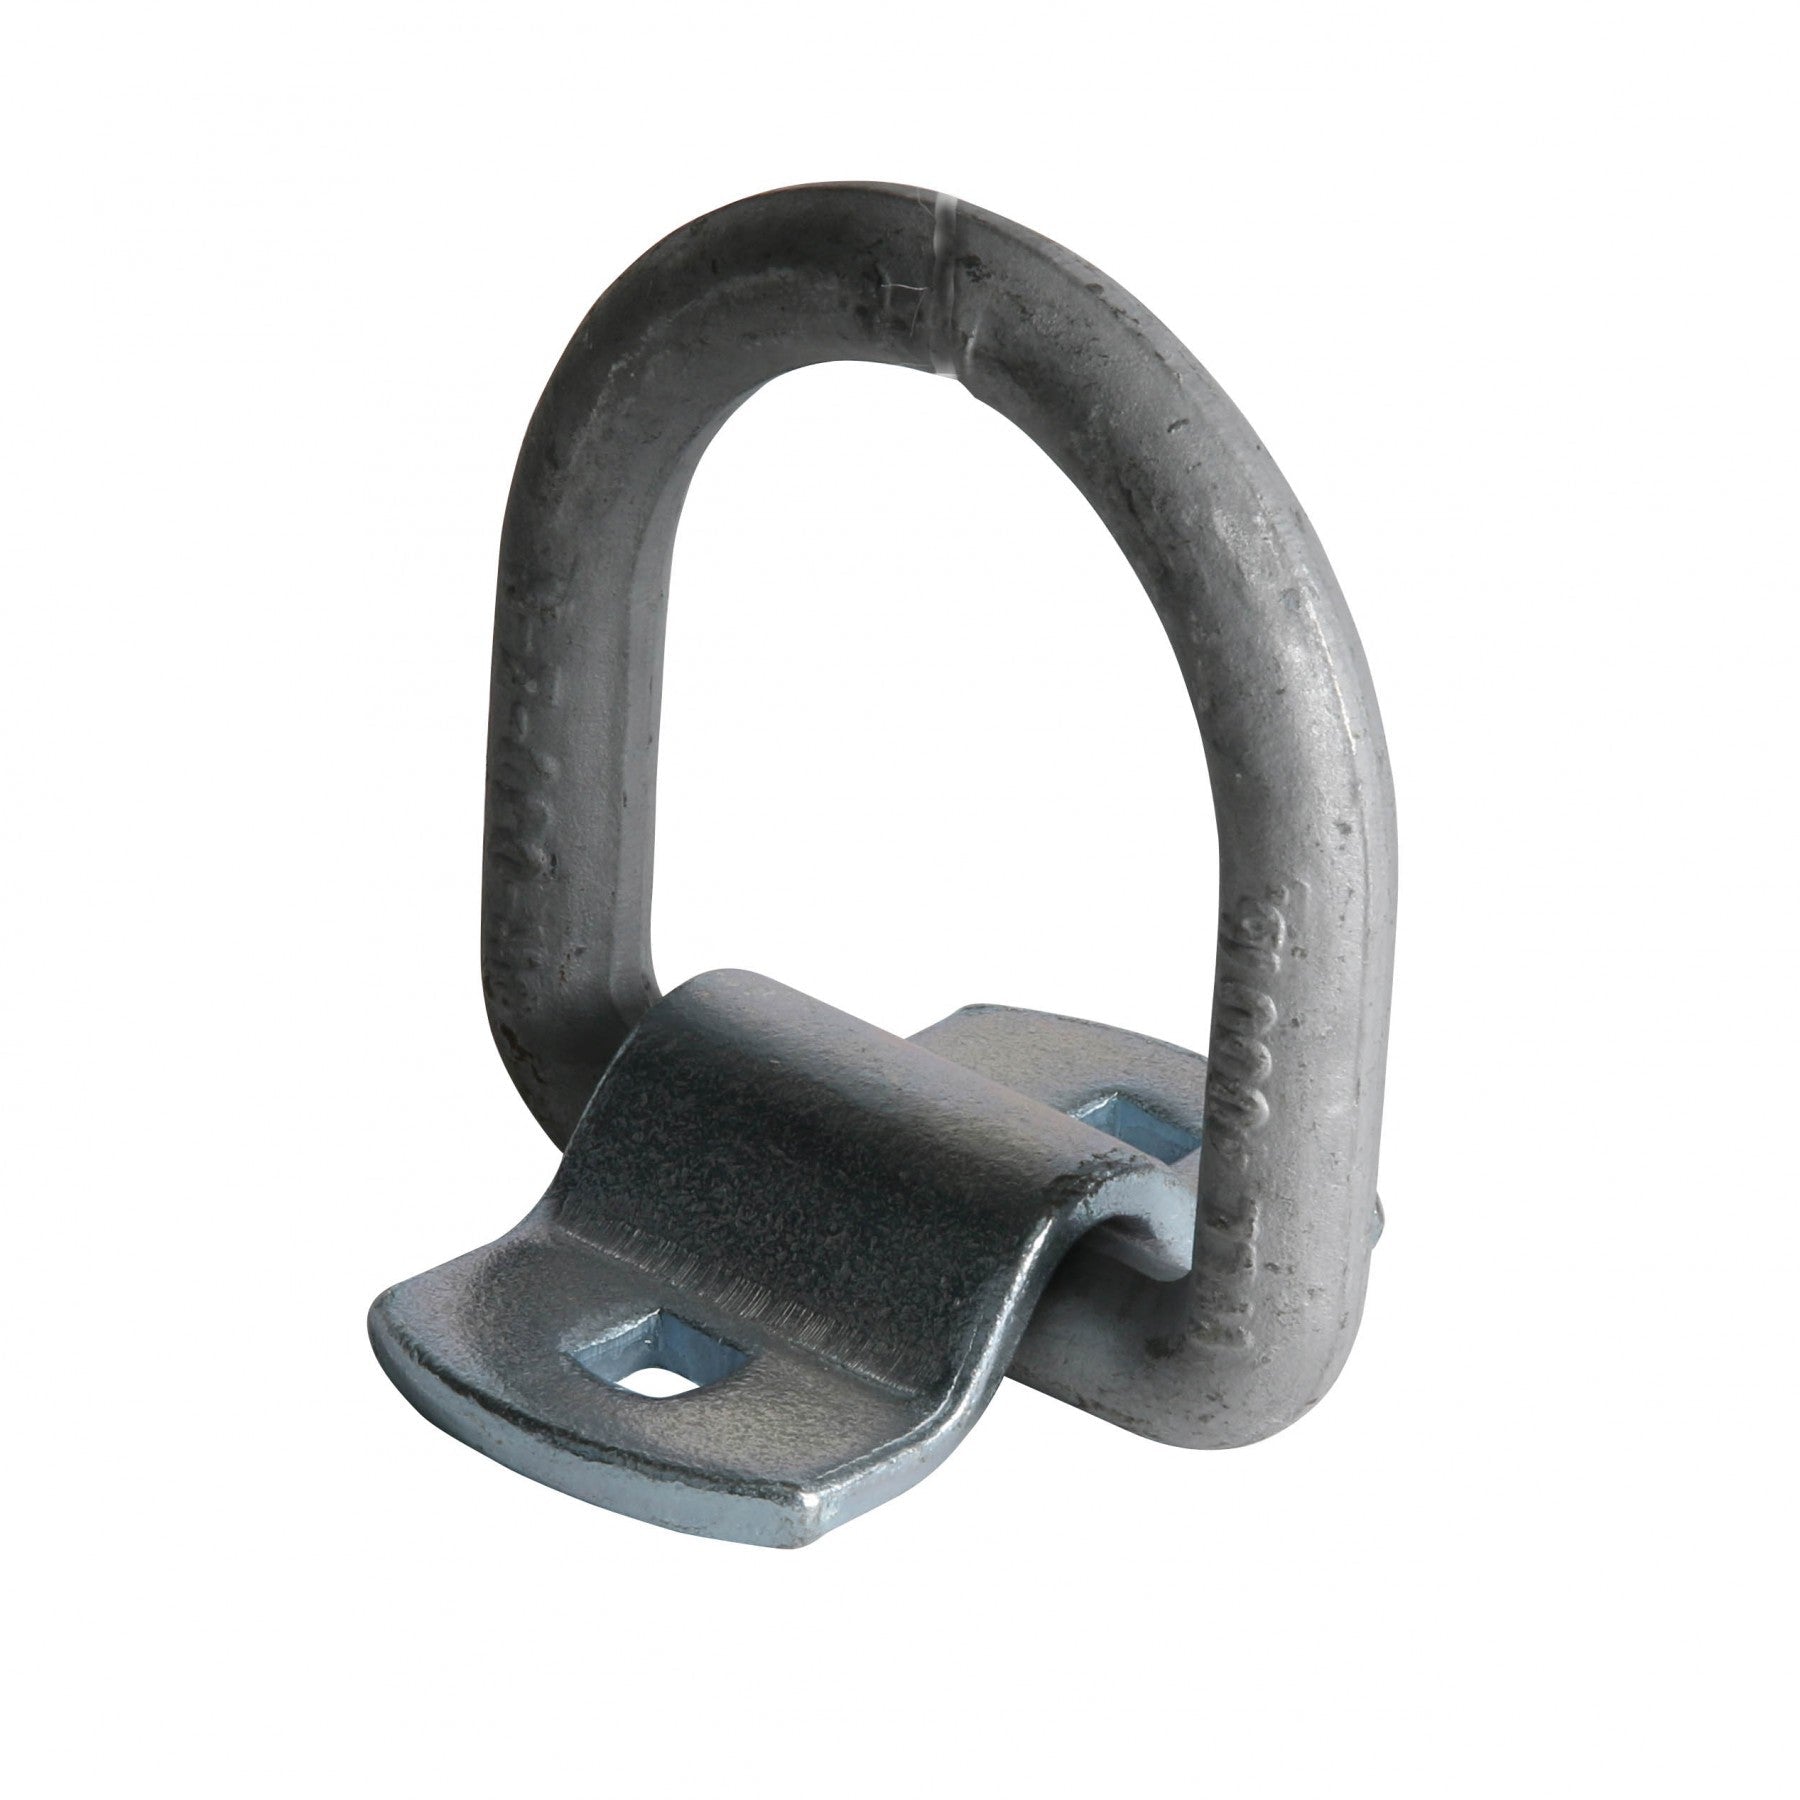 1/2 in. Forged Cargo D-Ring Anchor